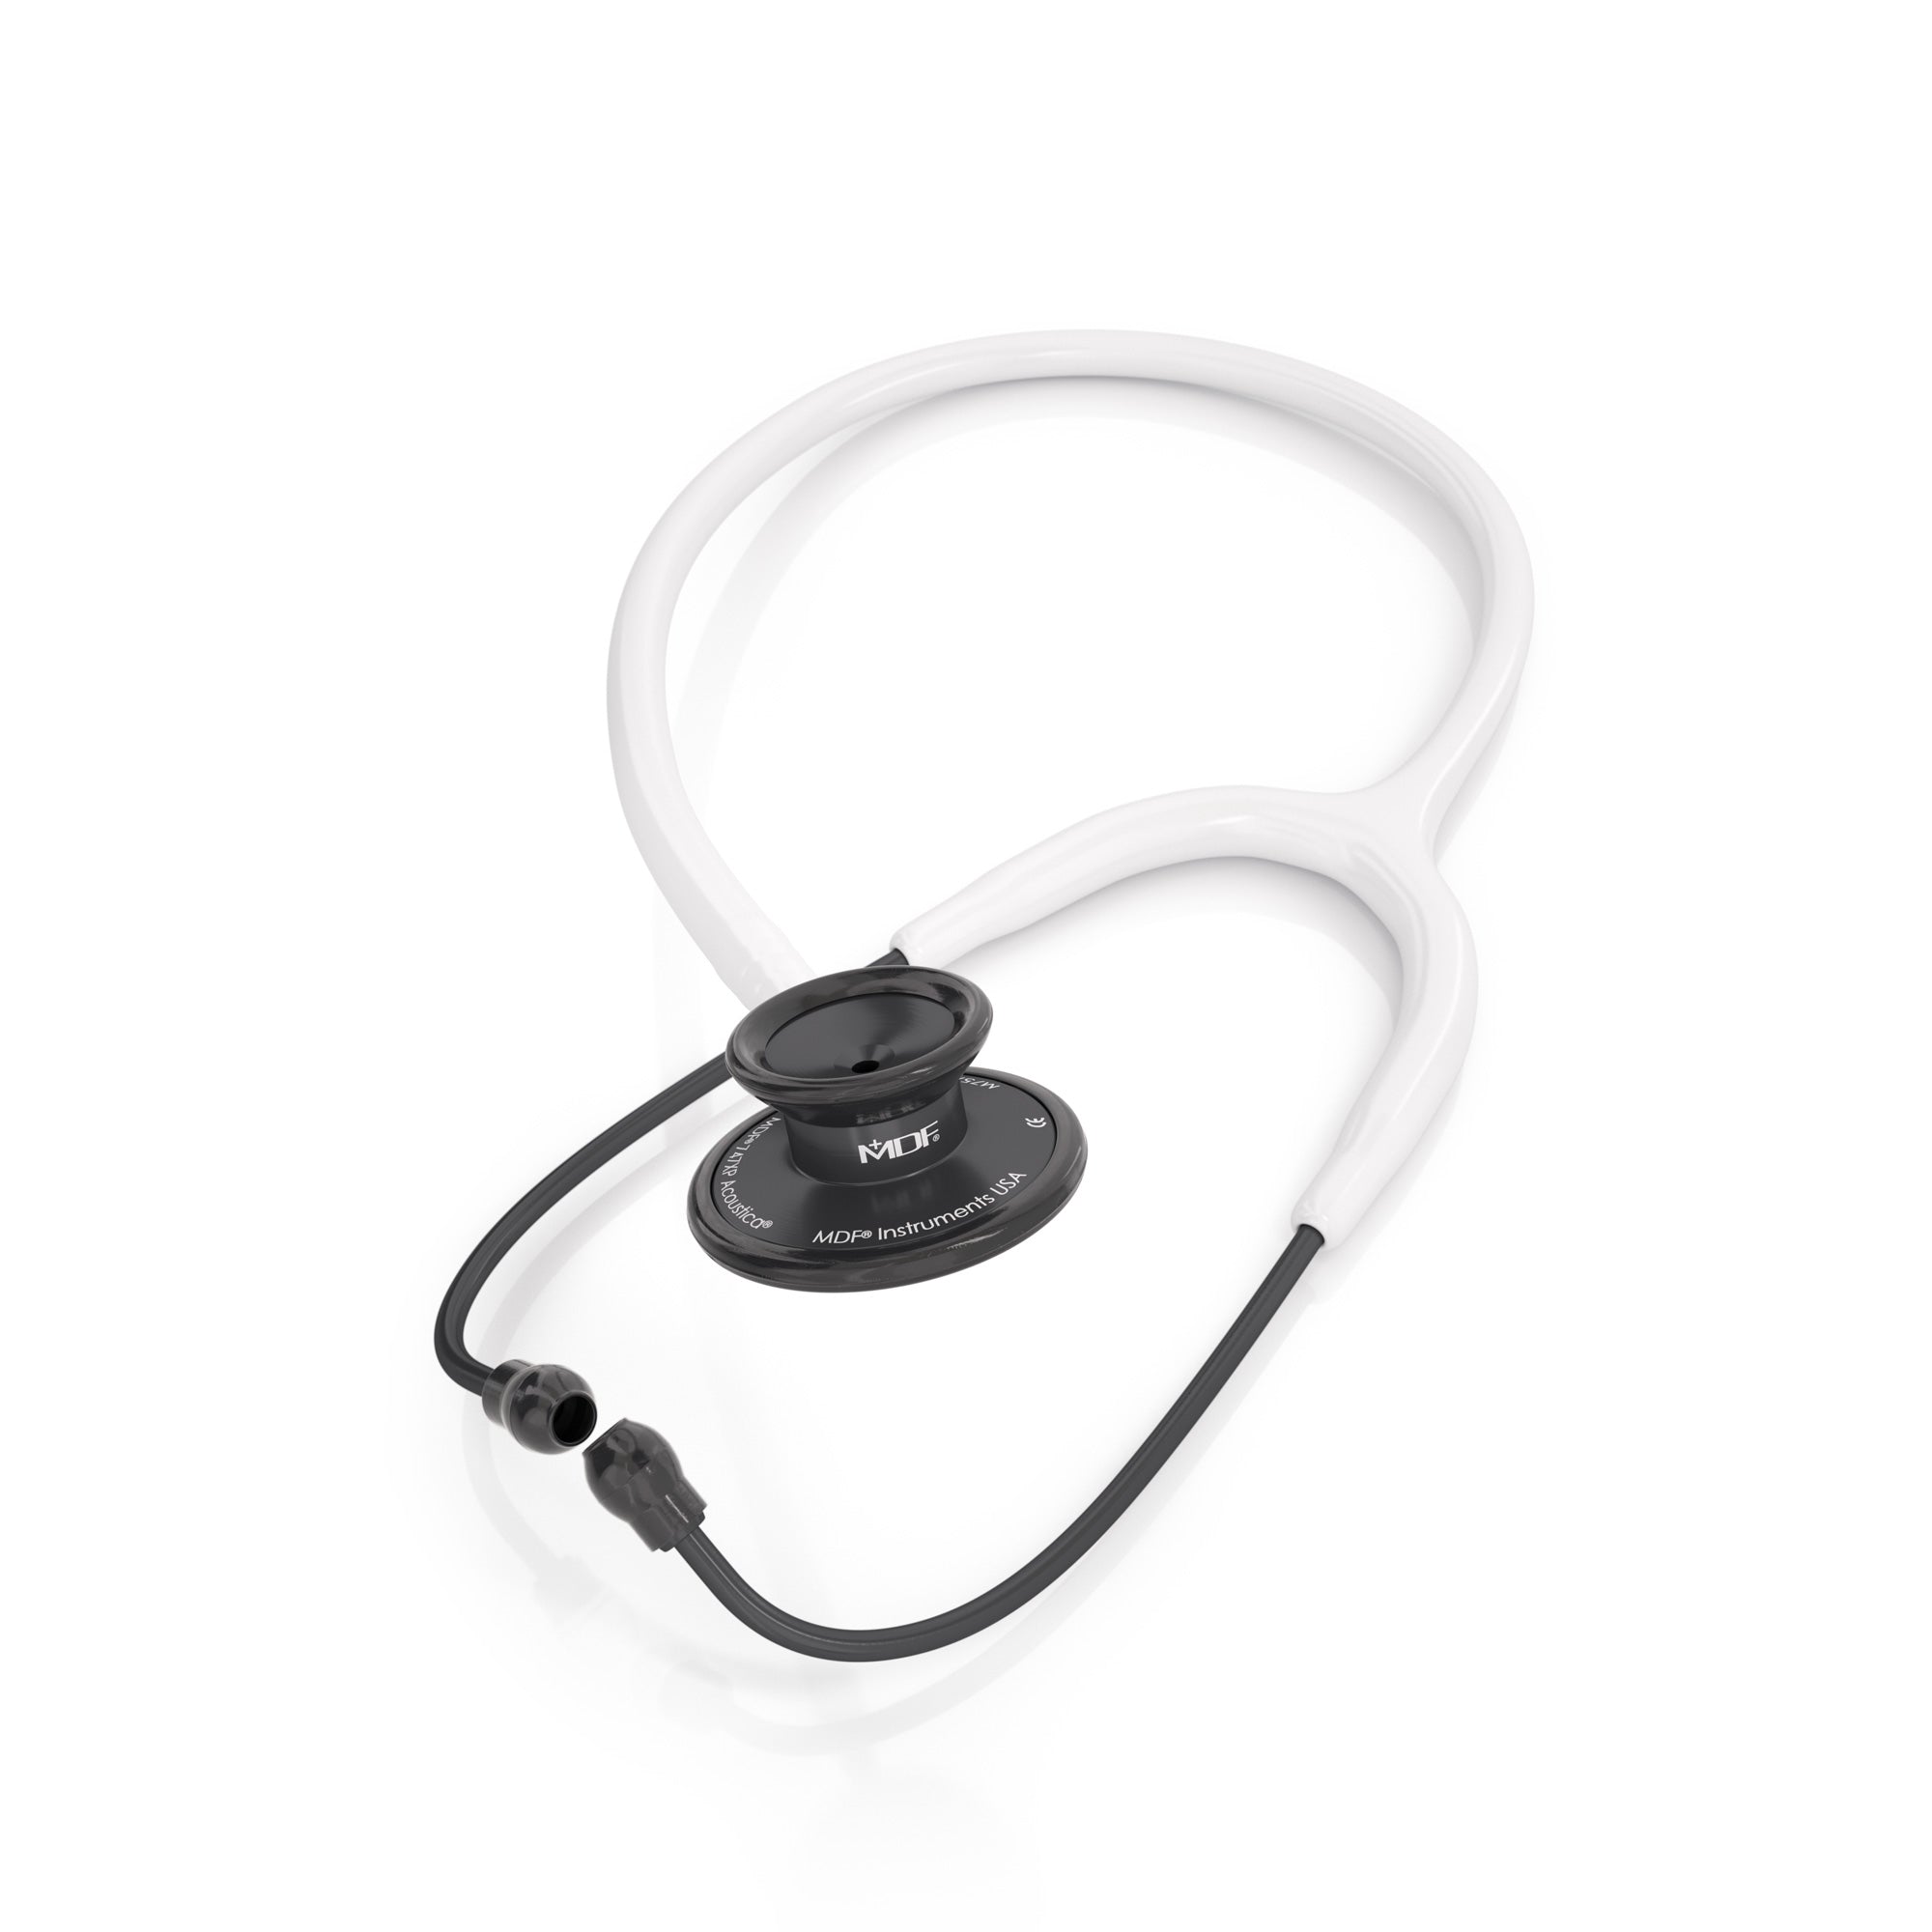 Stethoscope MDF Instruments Acoustica Lightweight Dual Head Black and White